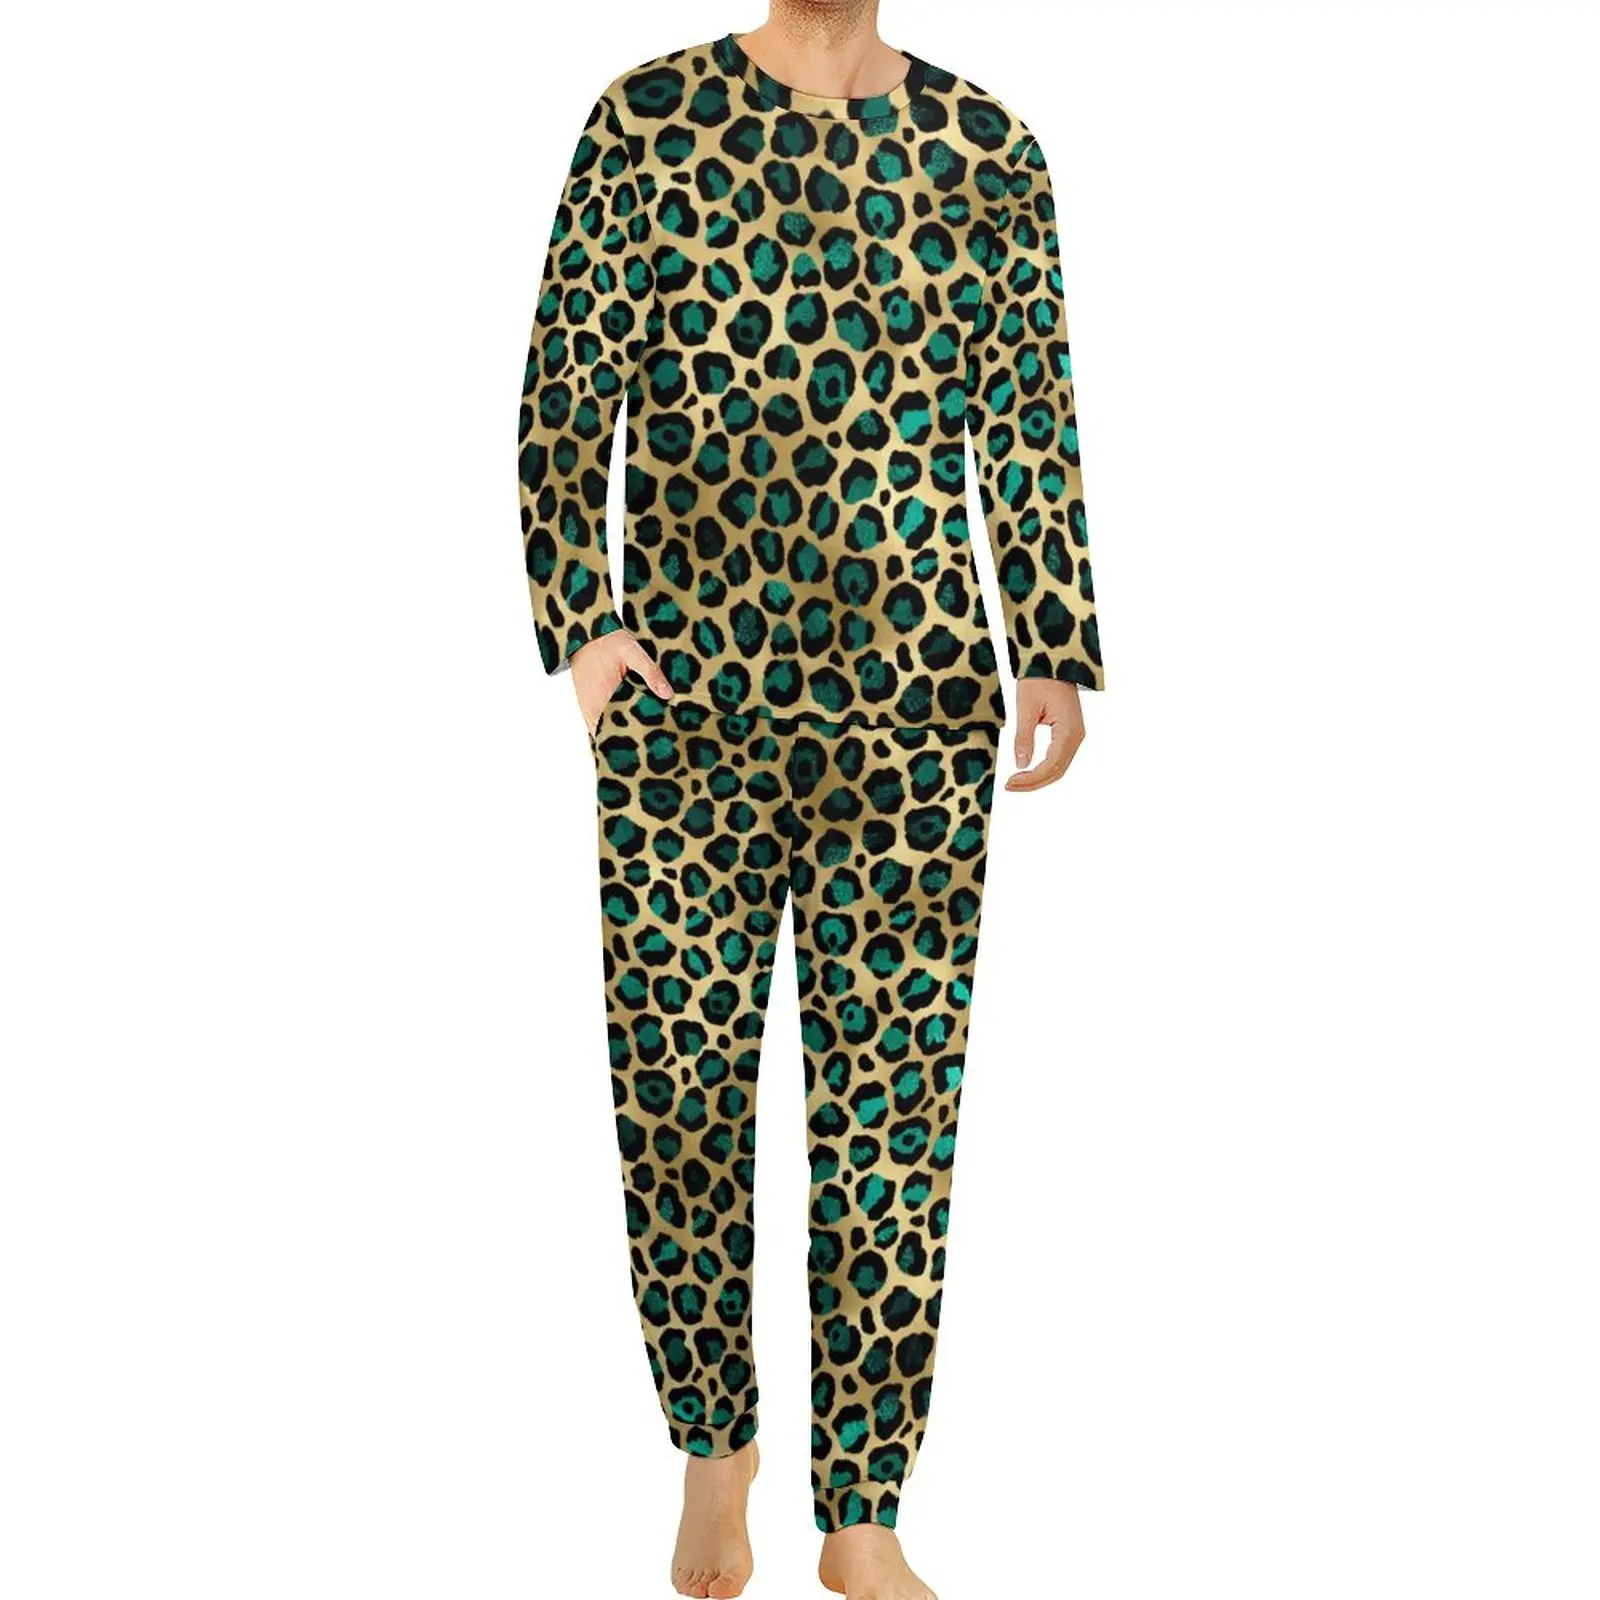 Teal And Gold Leopard Pajamas Spring 2 Pieces Spots Print Cute Pajamas Set Man Long Sleeve Leisure Home Suit Big Size 4XL 5XL